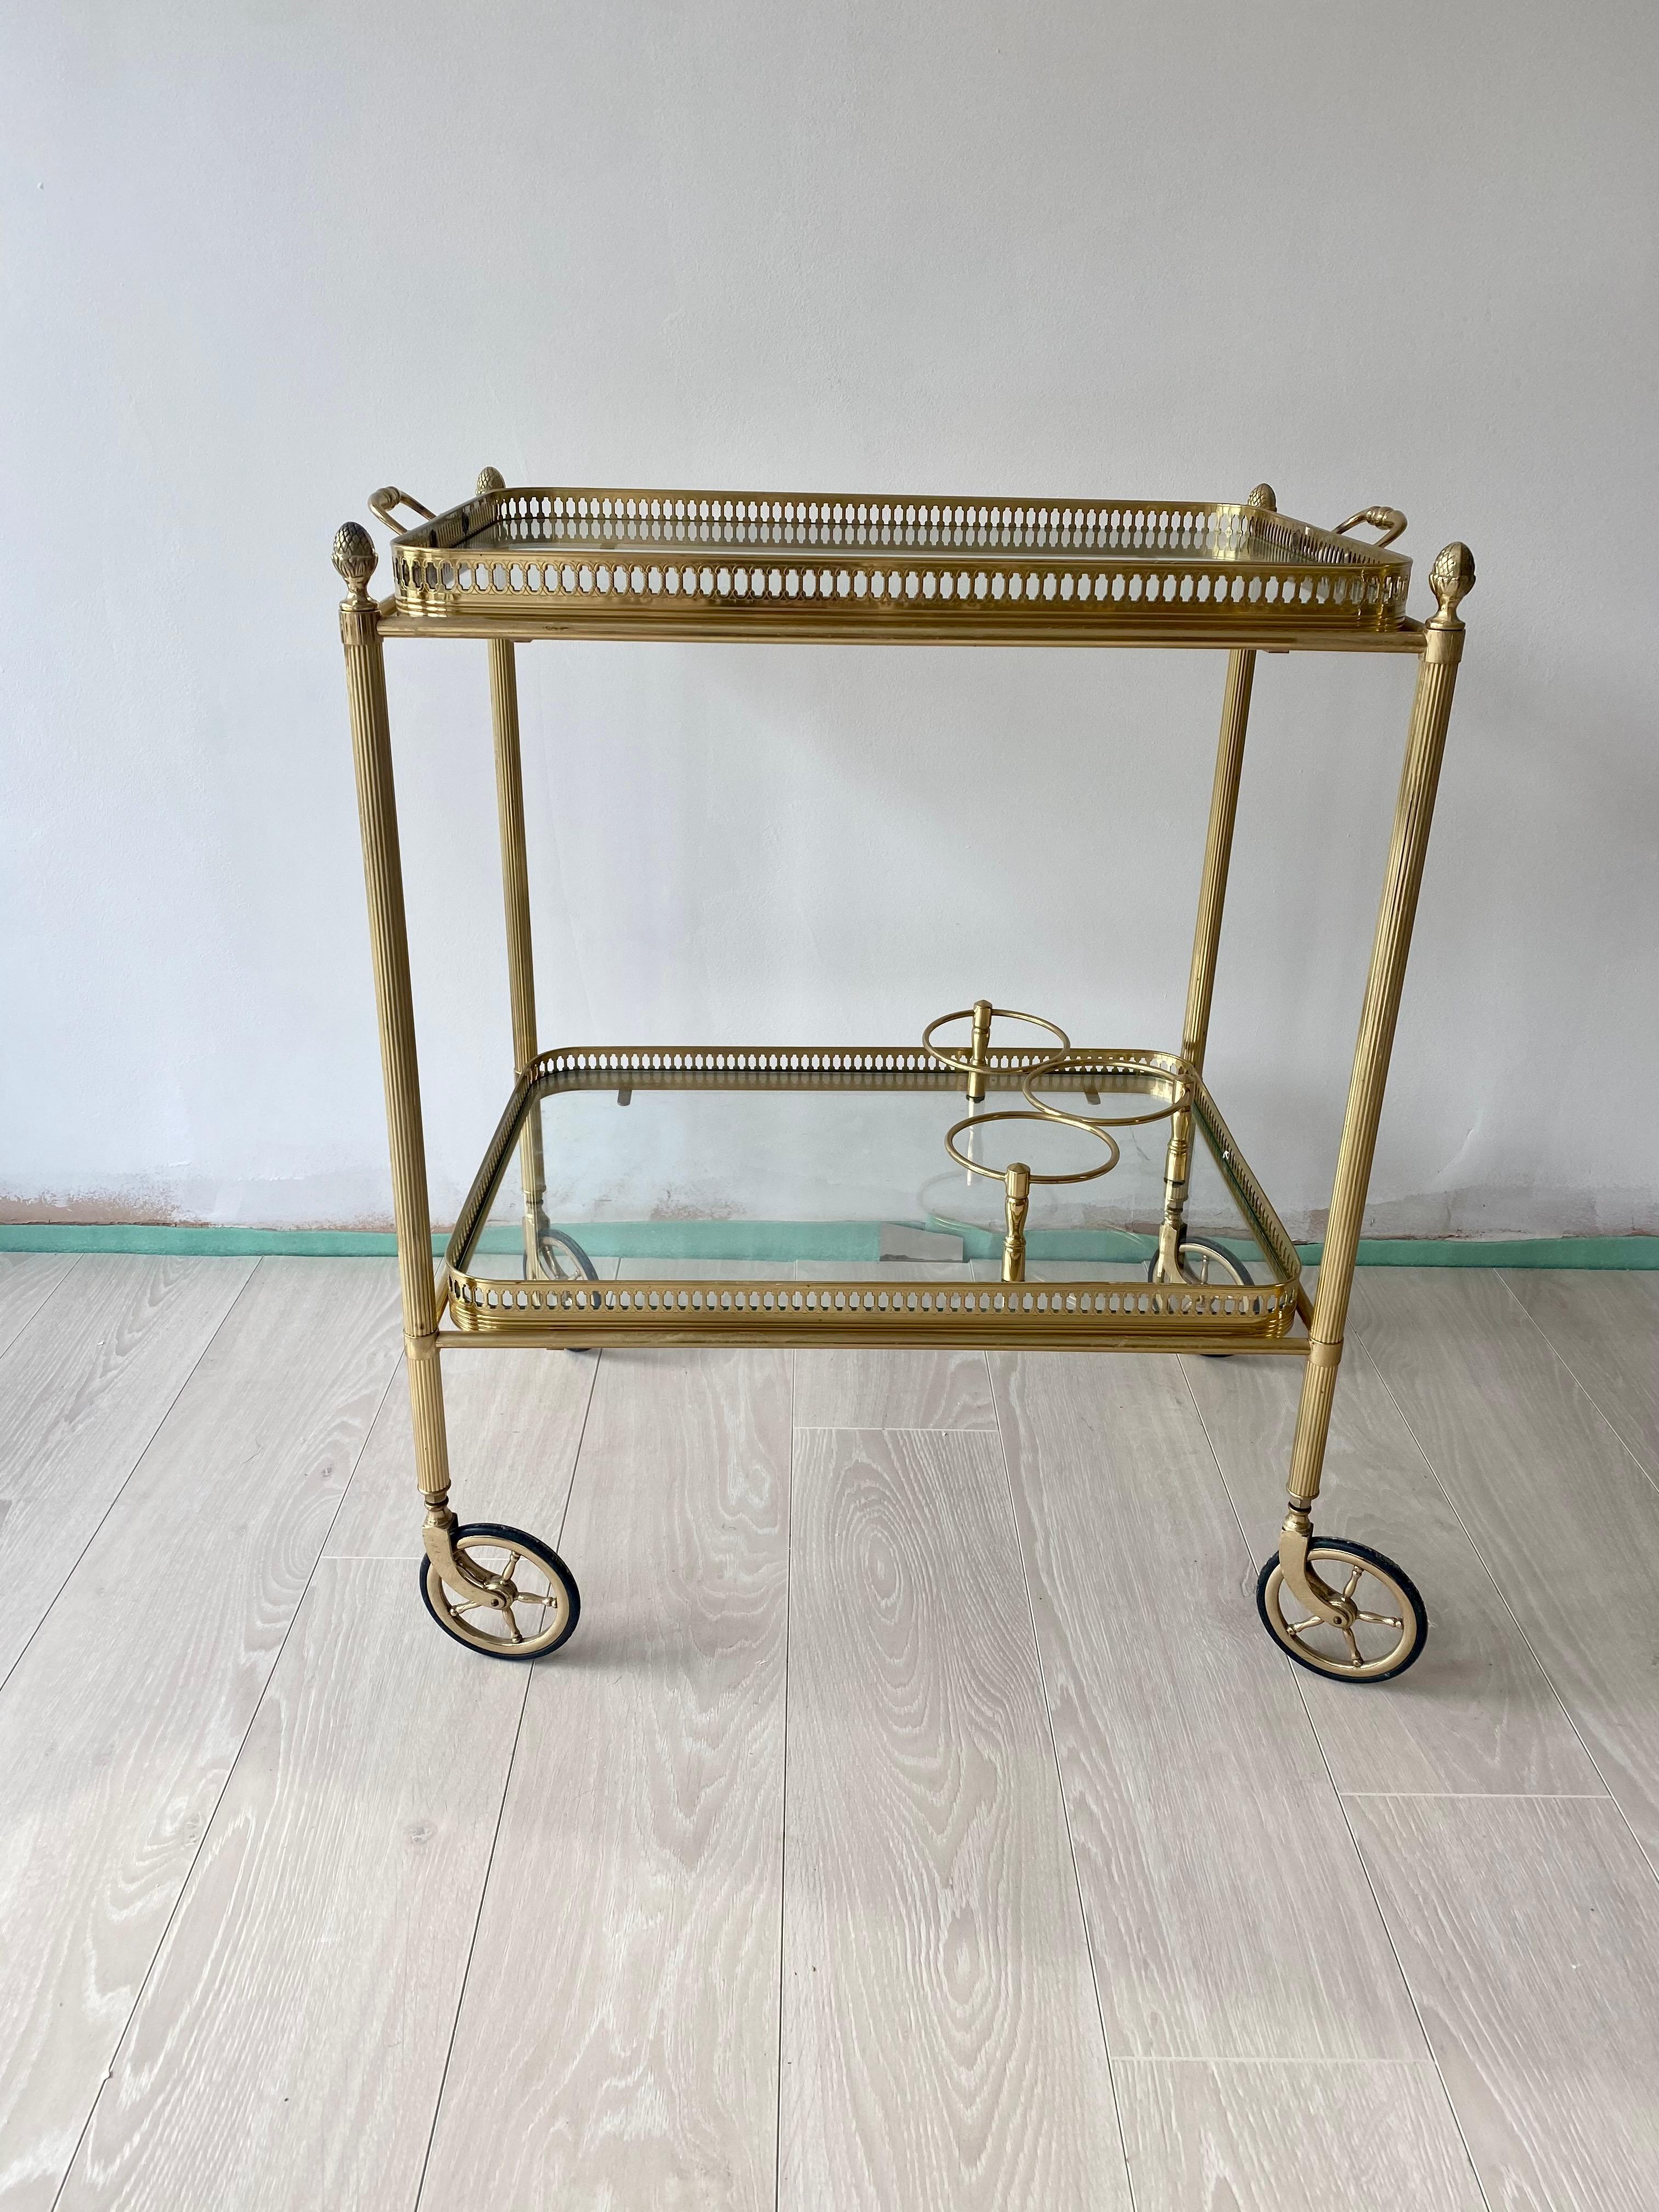 Perfect formed cocktail trolley from France 

Lift off top tray and bottle holder to lower tier

Brass frame with decorative finials

Top tray measures 50cm wide (58.5cm with handles)
40cm deep and stands 64cm to glass, 67.5cm to finials.